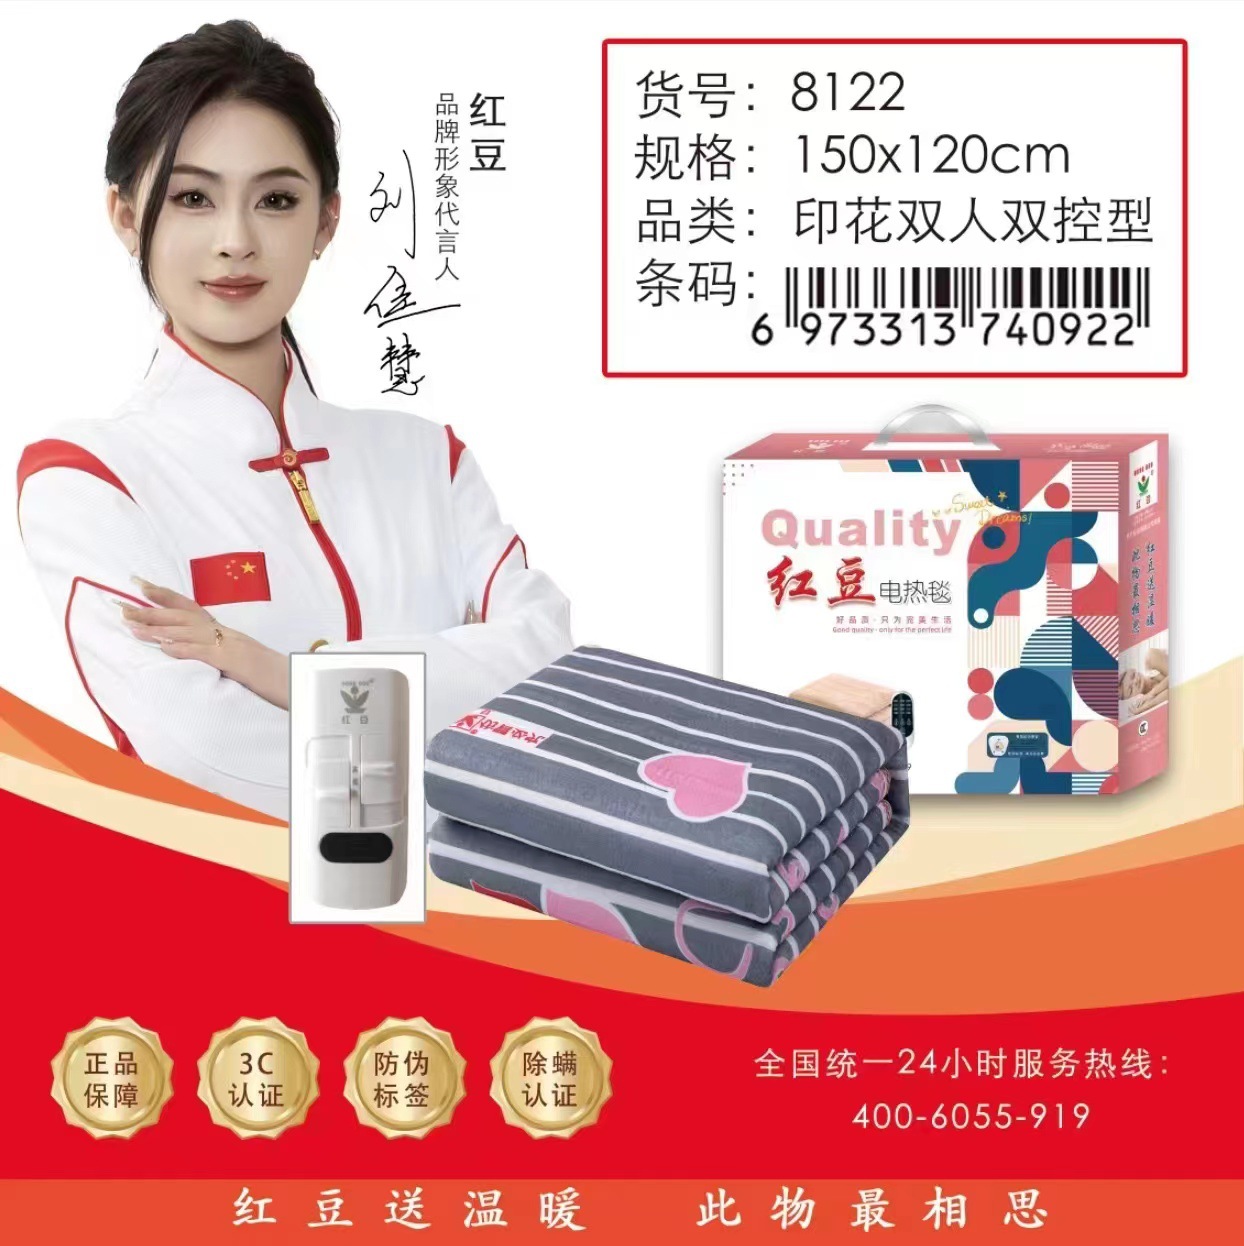 Authentic Red Bean Electric Blanket Single Double Double Control Temperature Control plus-Sized Safety Intelligence Student Household Dormitory Electric Blanket Winter